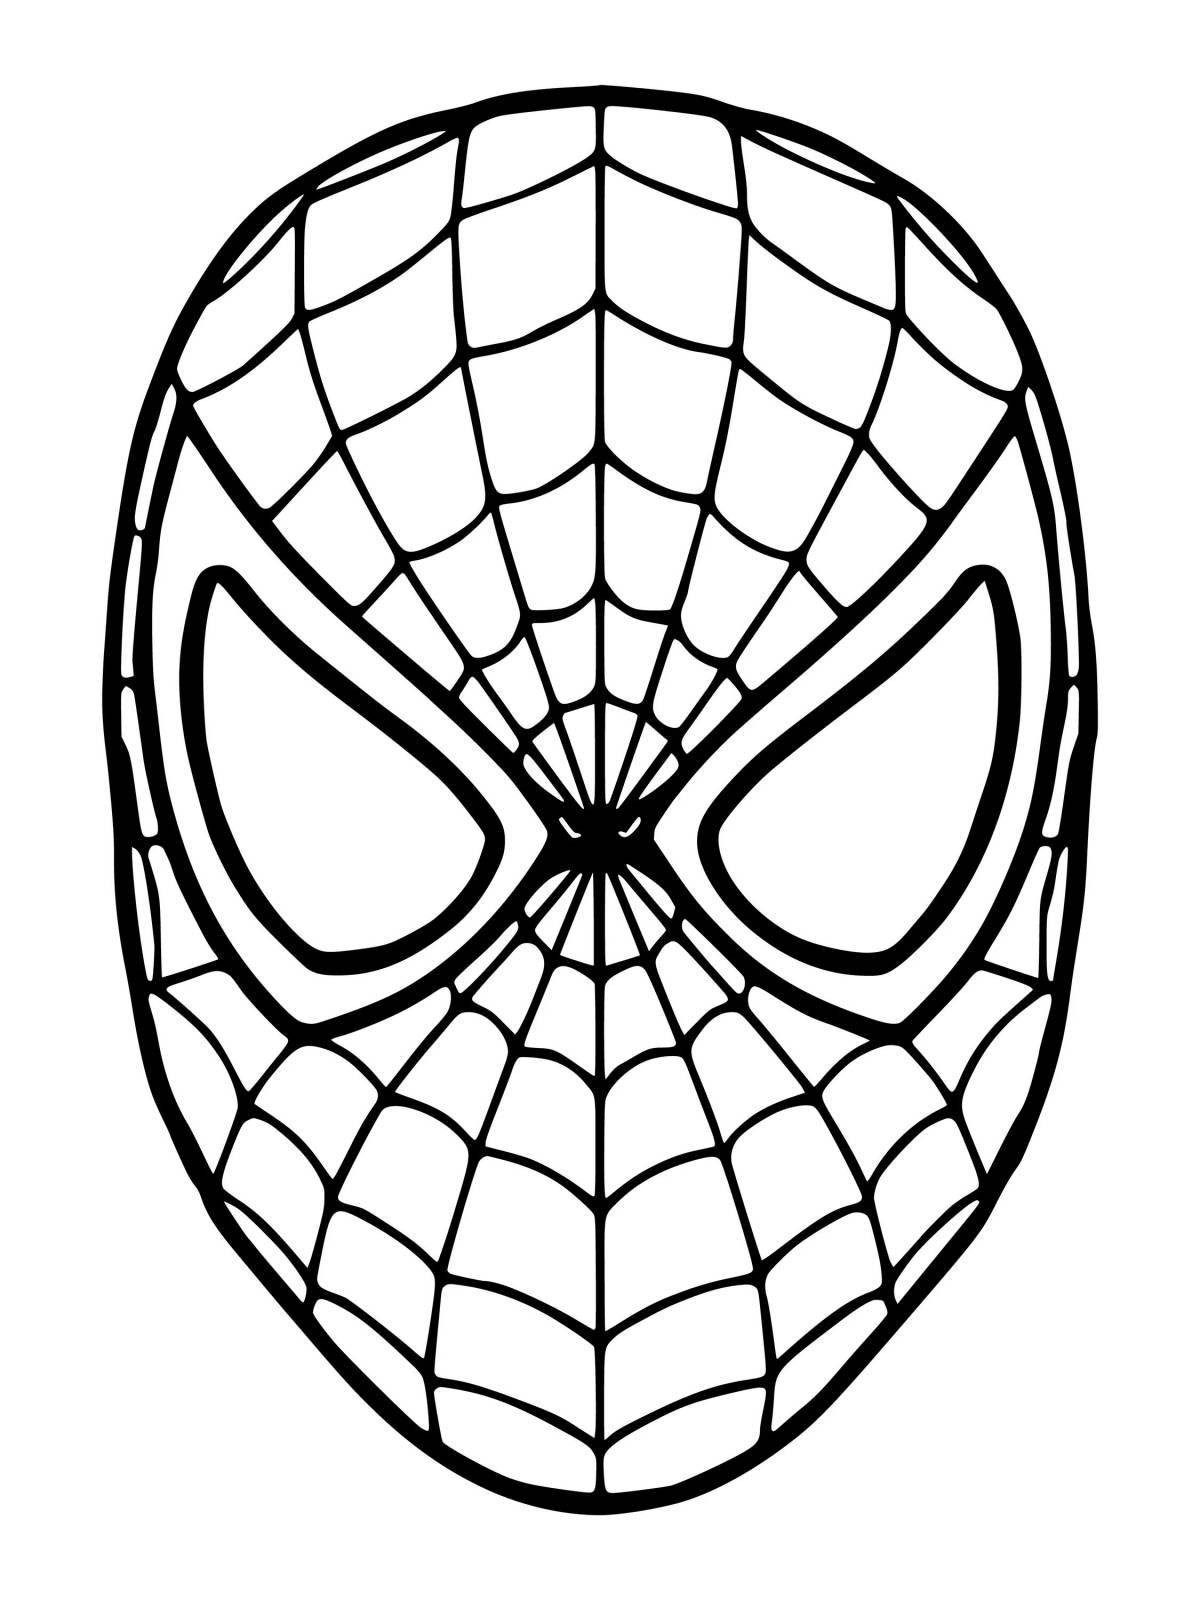 Spiderman face playful coloring page